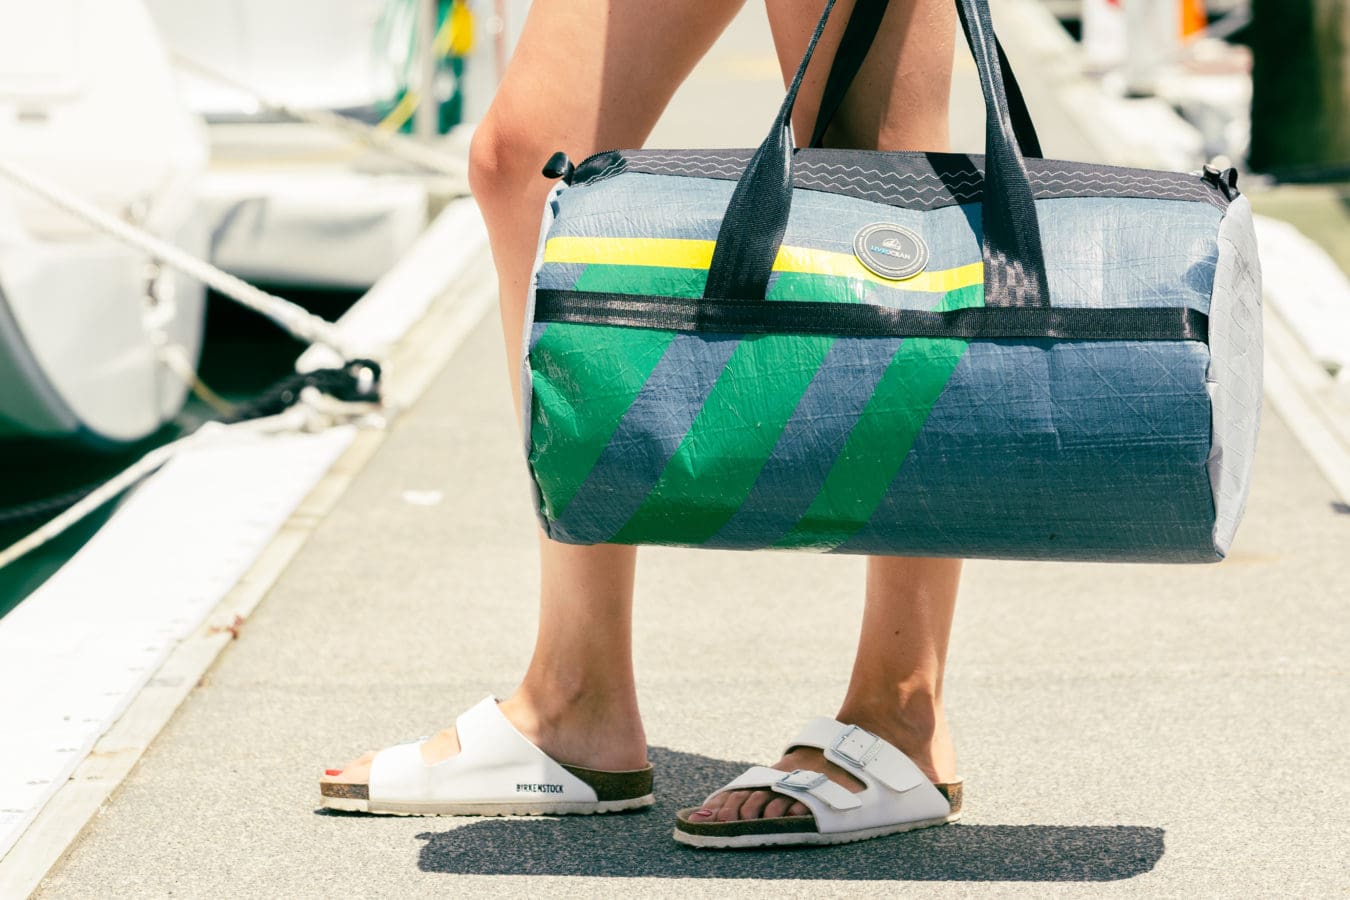 Live Ocean X Doyle Sails Bags, Luggage, Sustainability